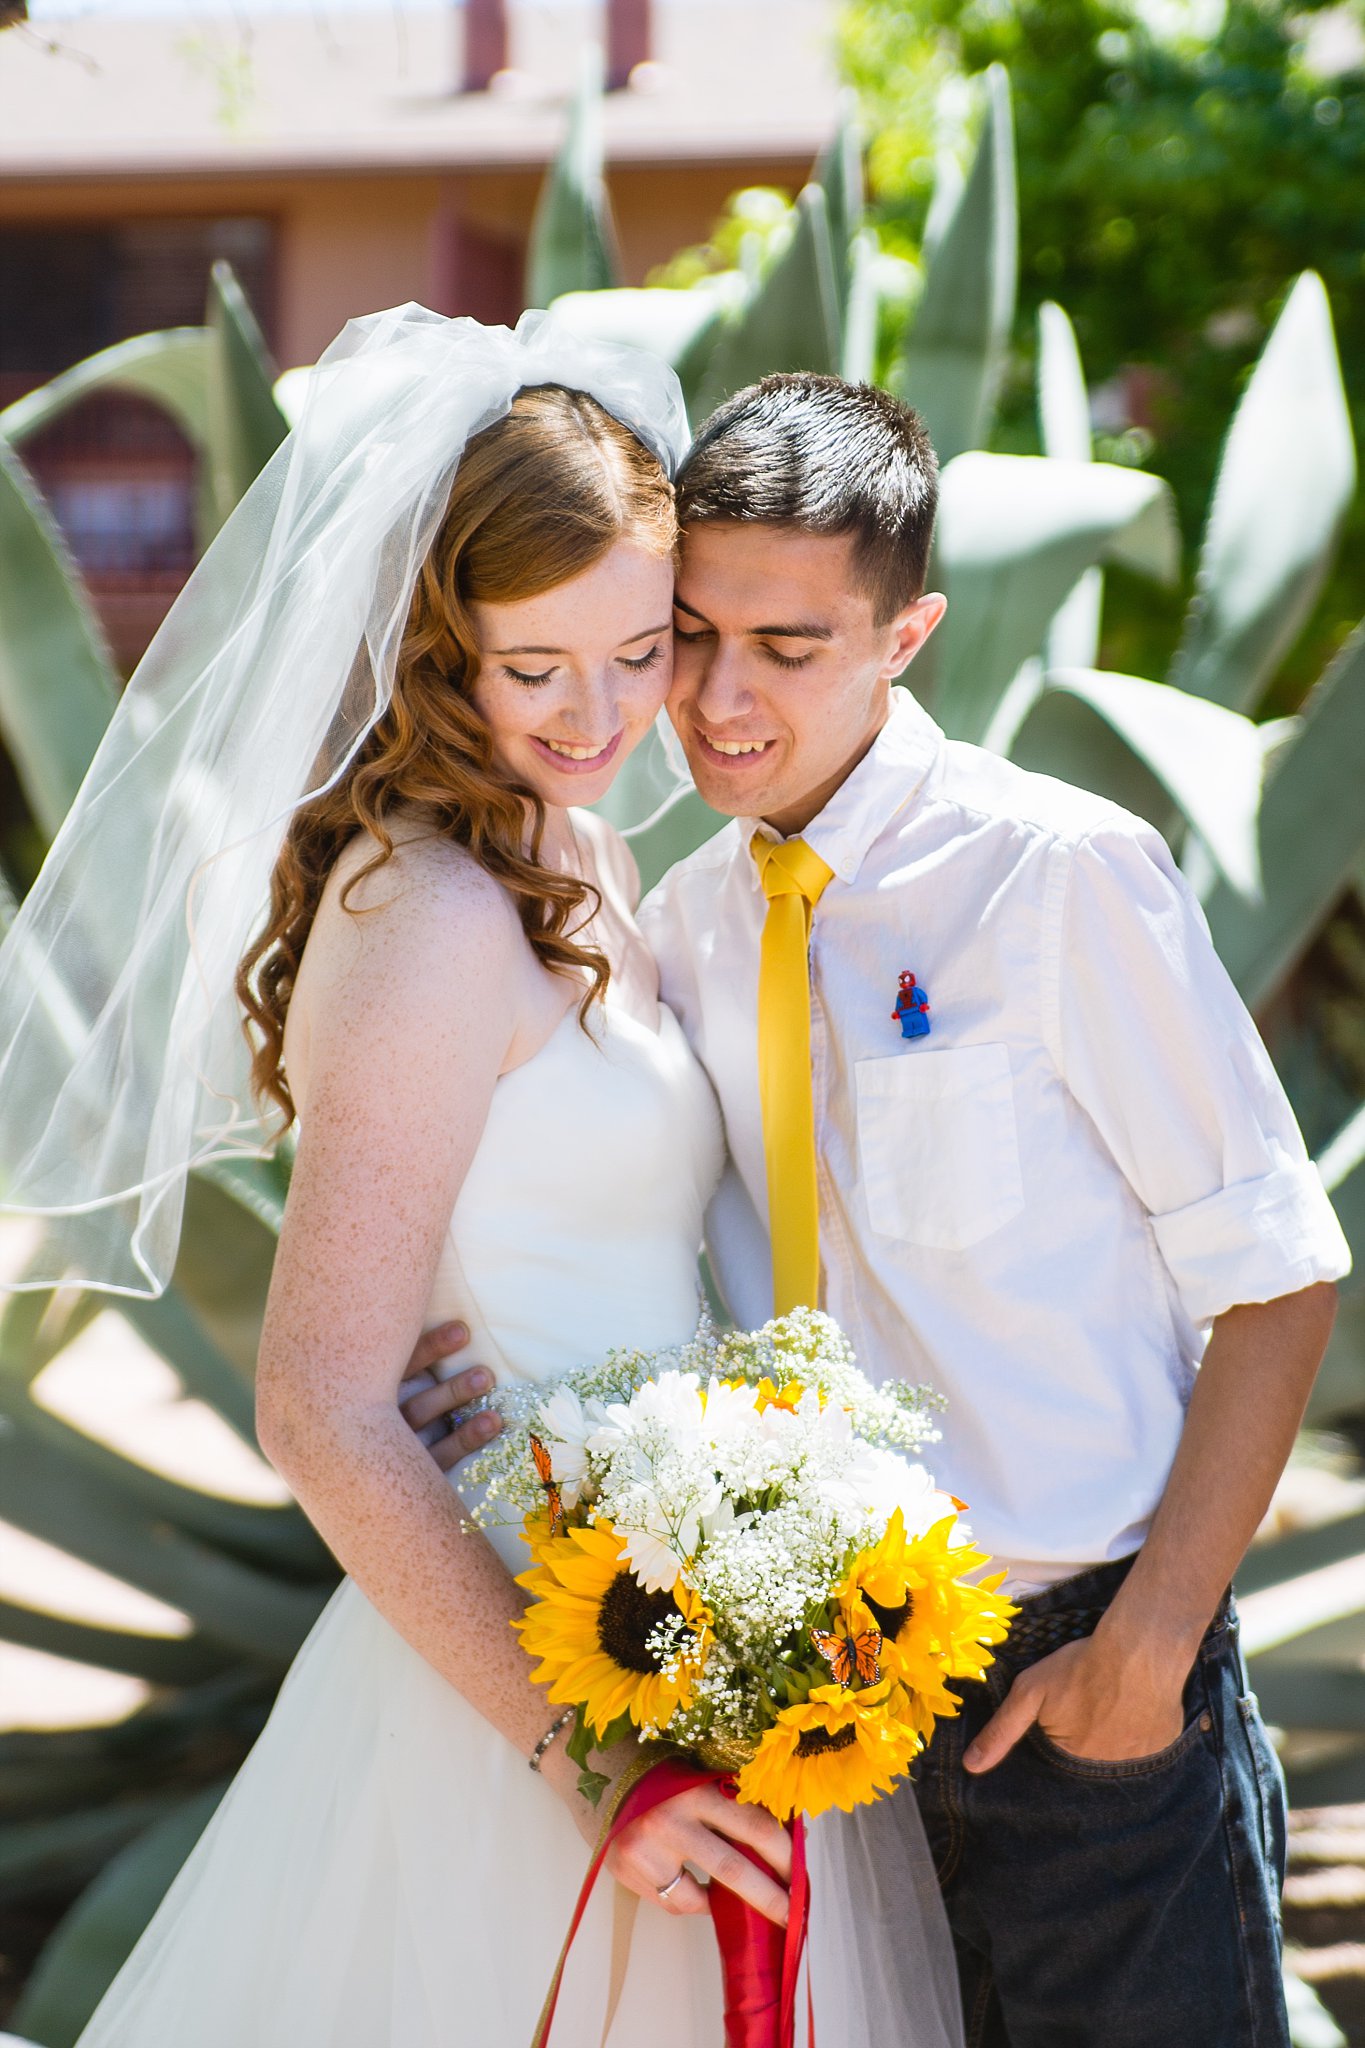 Bride and groom together at their Sky Ranch Lodge wedding by Sedona wedding photographer PMA Photography.